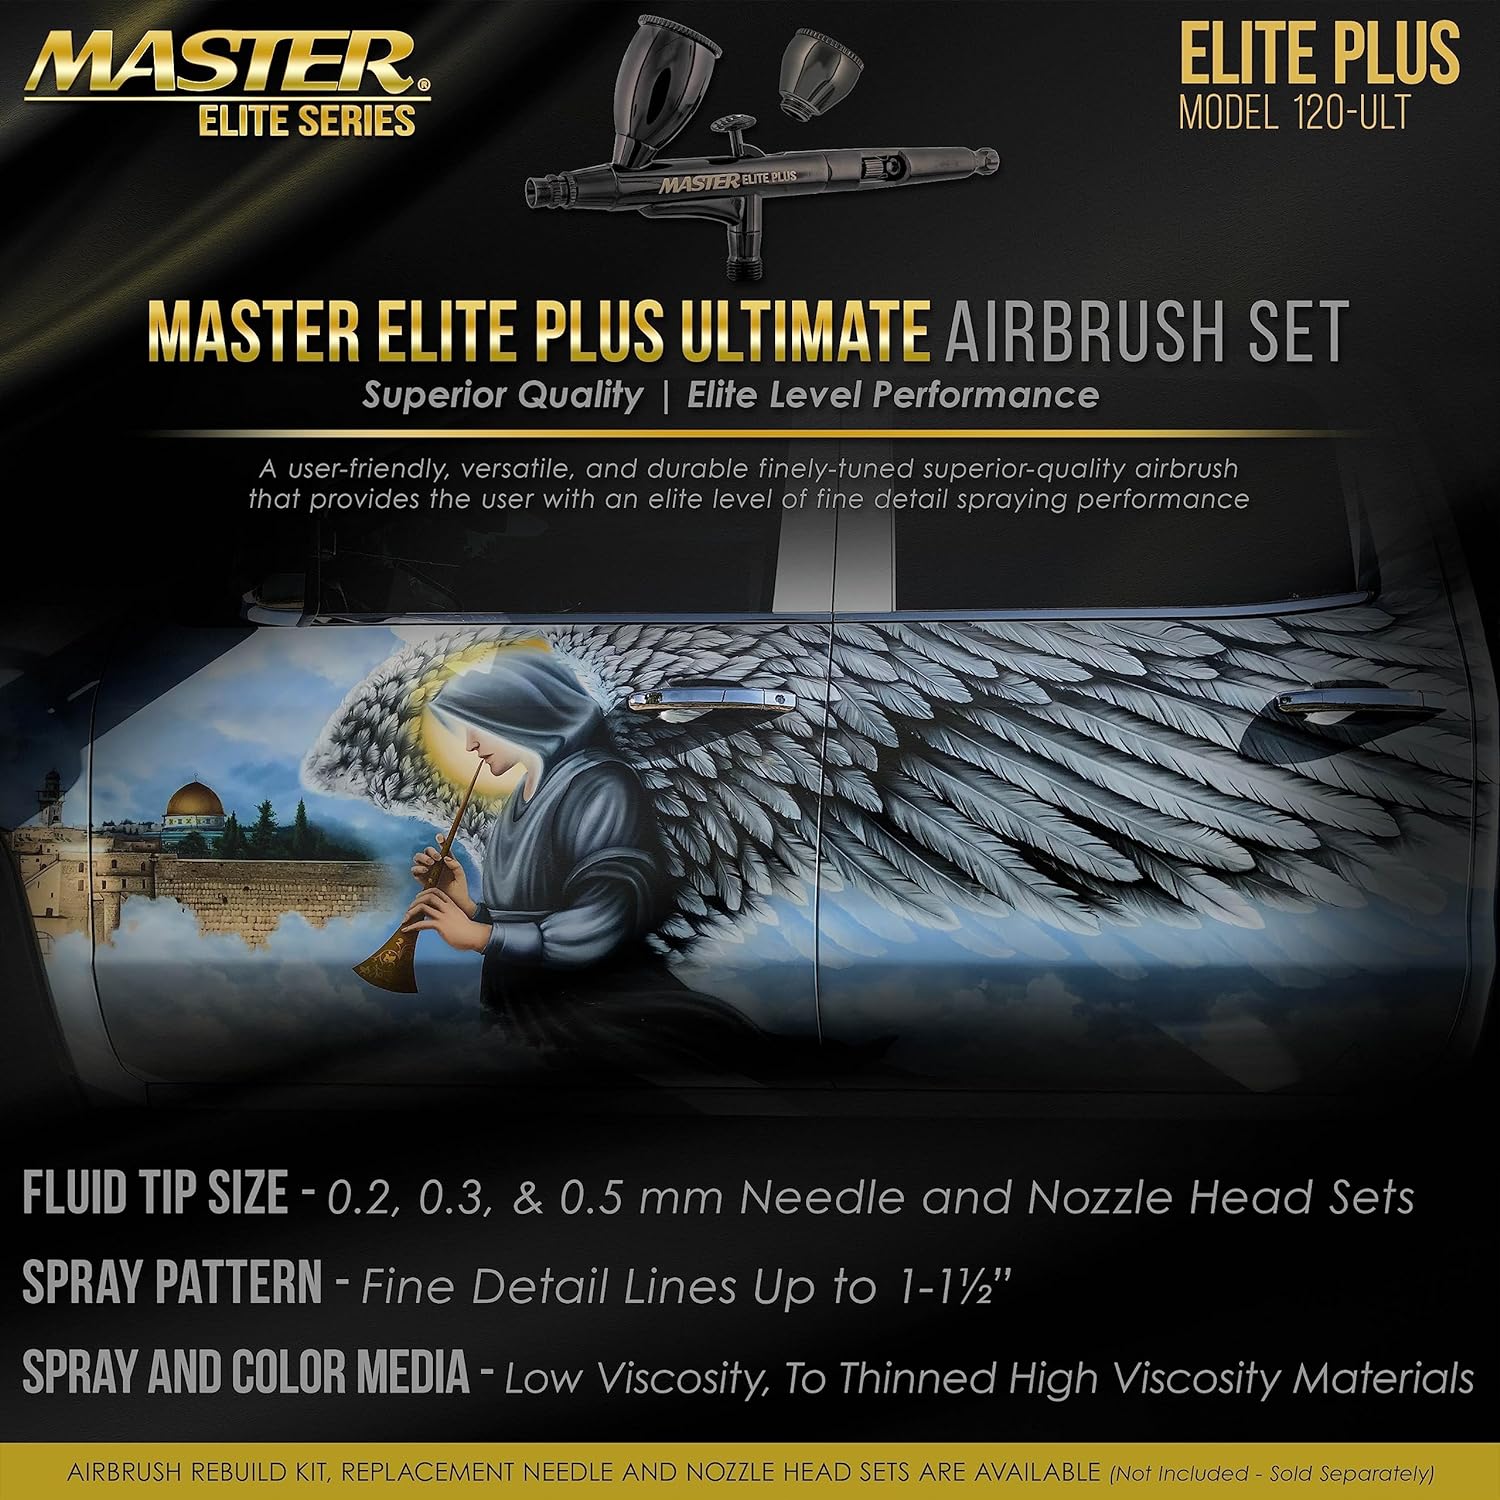 Master Elite Plus Ultimate Airbrush Set, Model 120 - Elite Level Spray Performance Dual-Action Gravity Feed Airbrush Kit with 3 Tips 0.2, 0.3 and 0.5 mm, 2 Cups, Filter, Case - Auto Art Cake Hobby